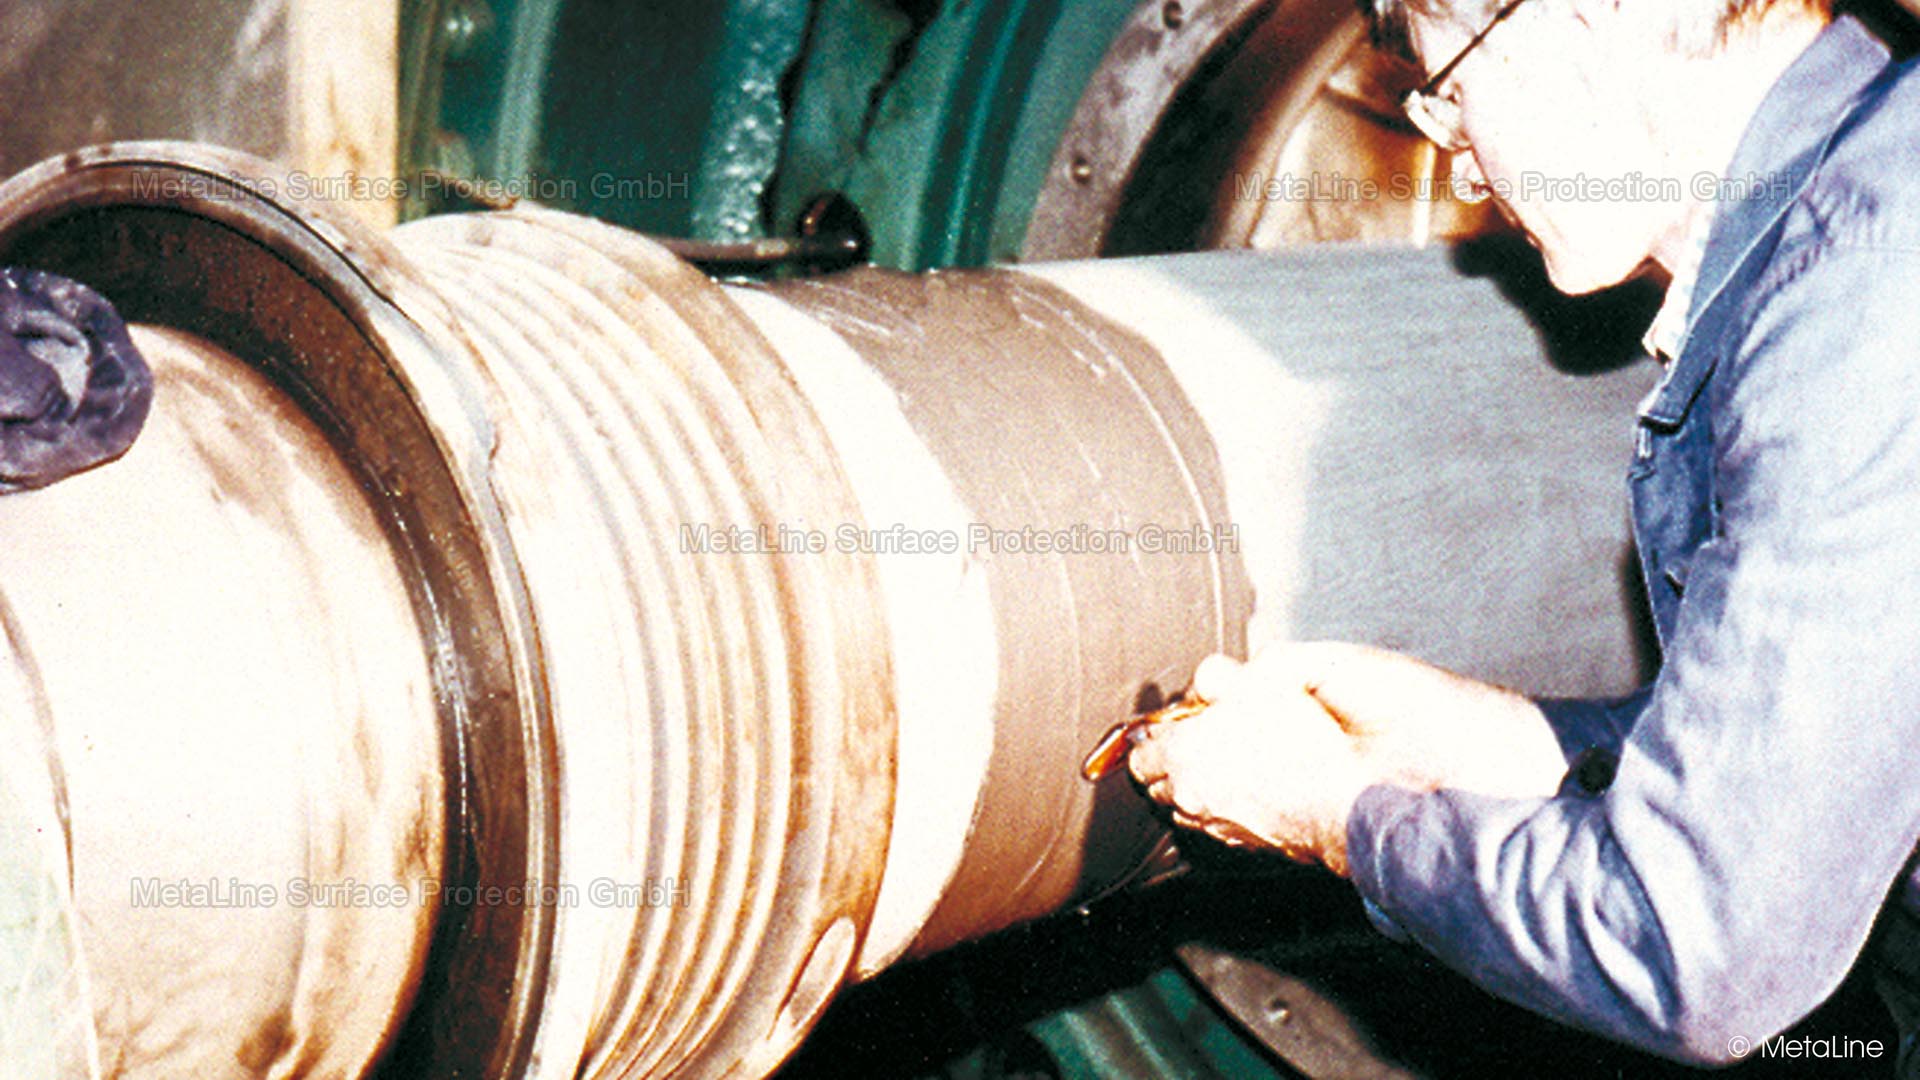 <!-- START: ConditionalContent --> Turbine shaft, drive shaft, bearing point, fill, remove, recondition <!-- END: ConditionalContent -->   <!-- START: ConditionalContent --><!-- END: ConditionalContent -->   <!-- START: ConditionalContent --><!-- END: ConditionalContent --> <!-- START: ConditionalContent --><!-- END: ConditionalContent -->